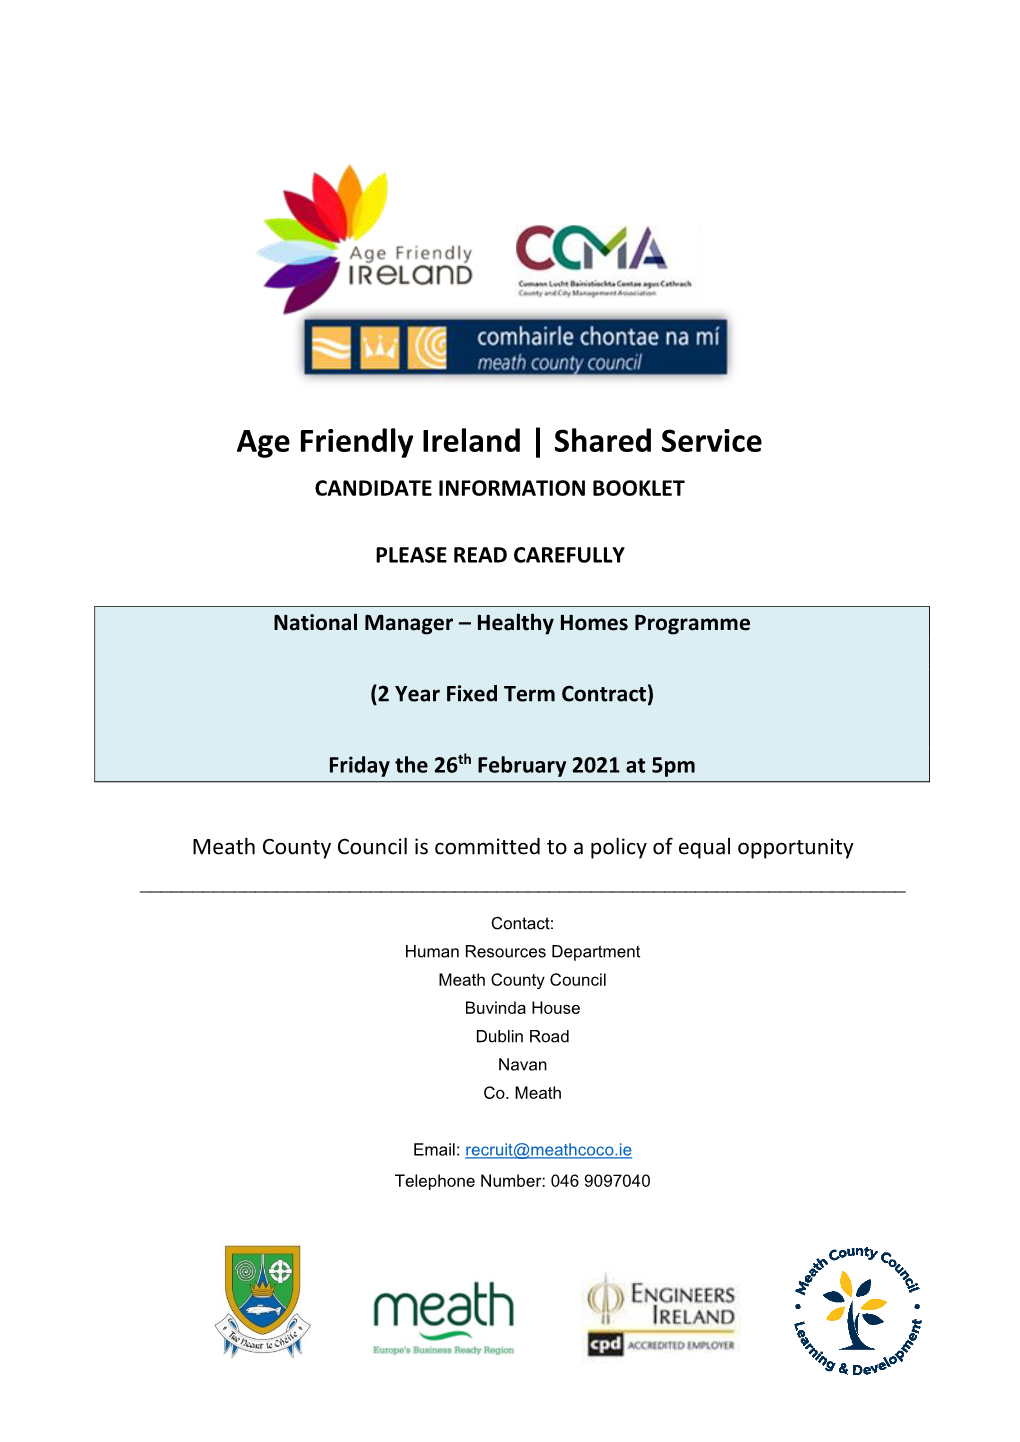 Age Friendly Ireland | Shared Service CANDIDATE INFORMATION BOOKLET